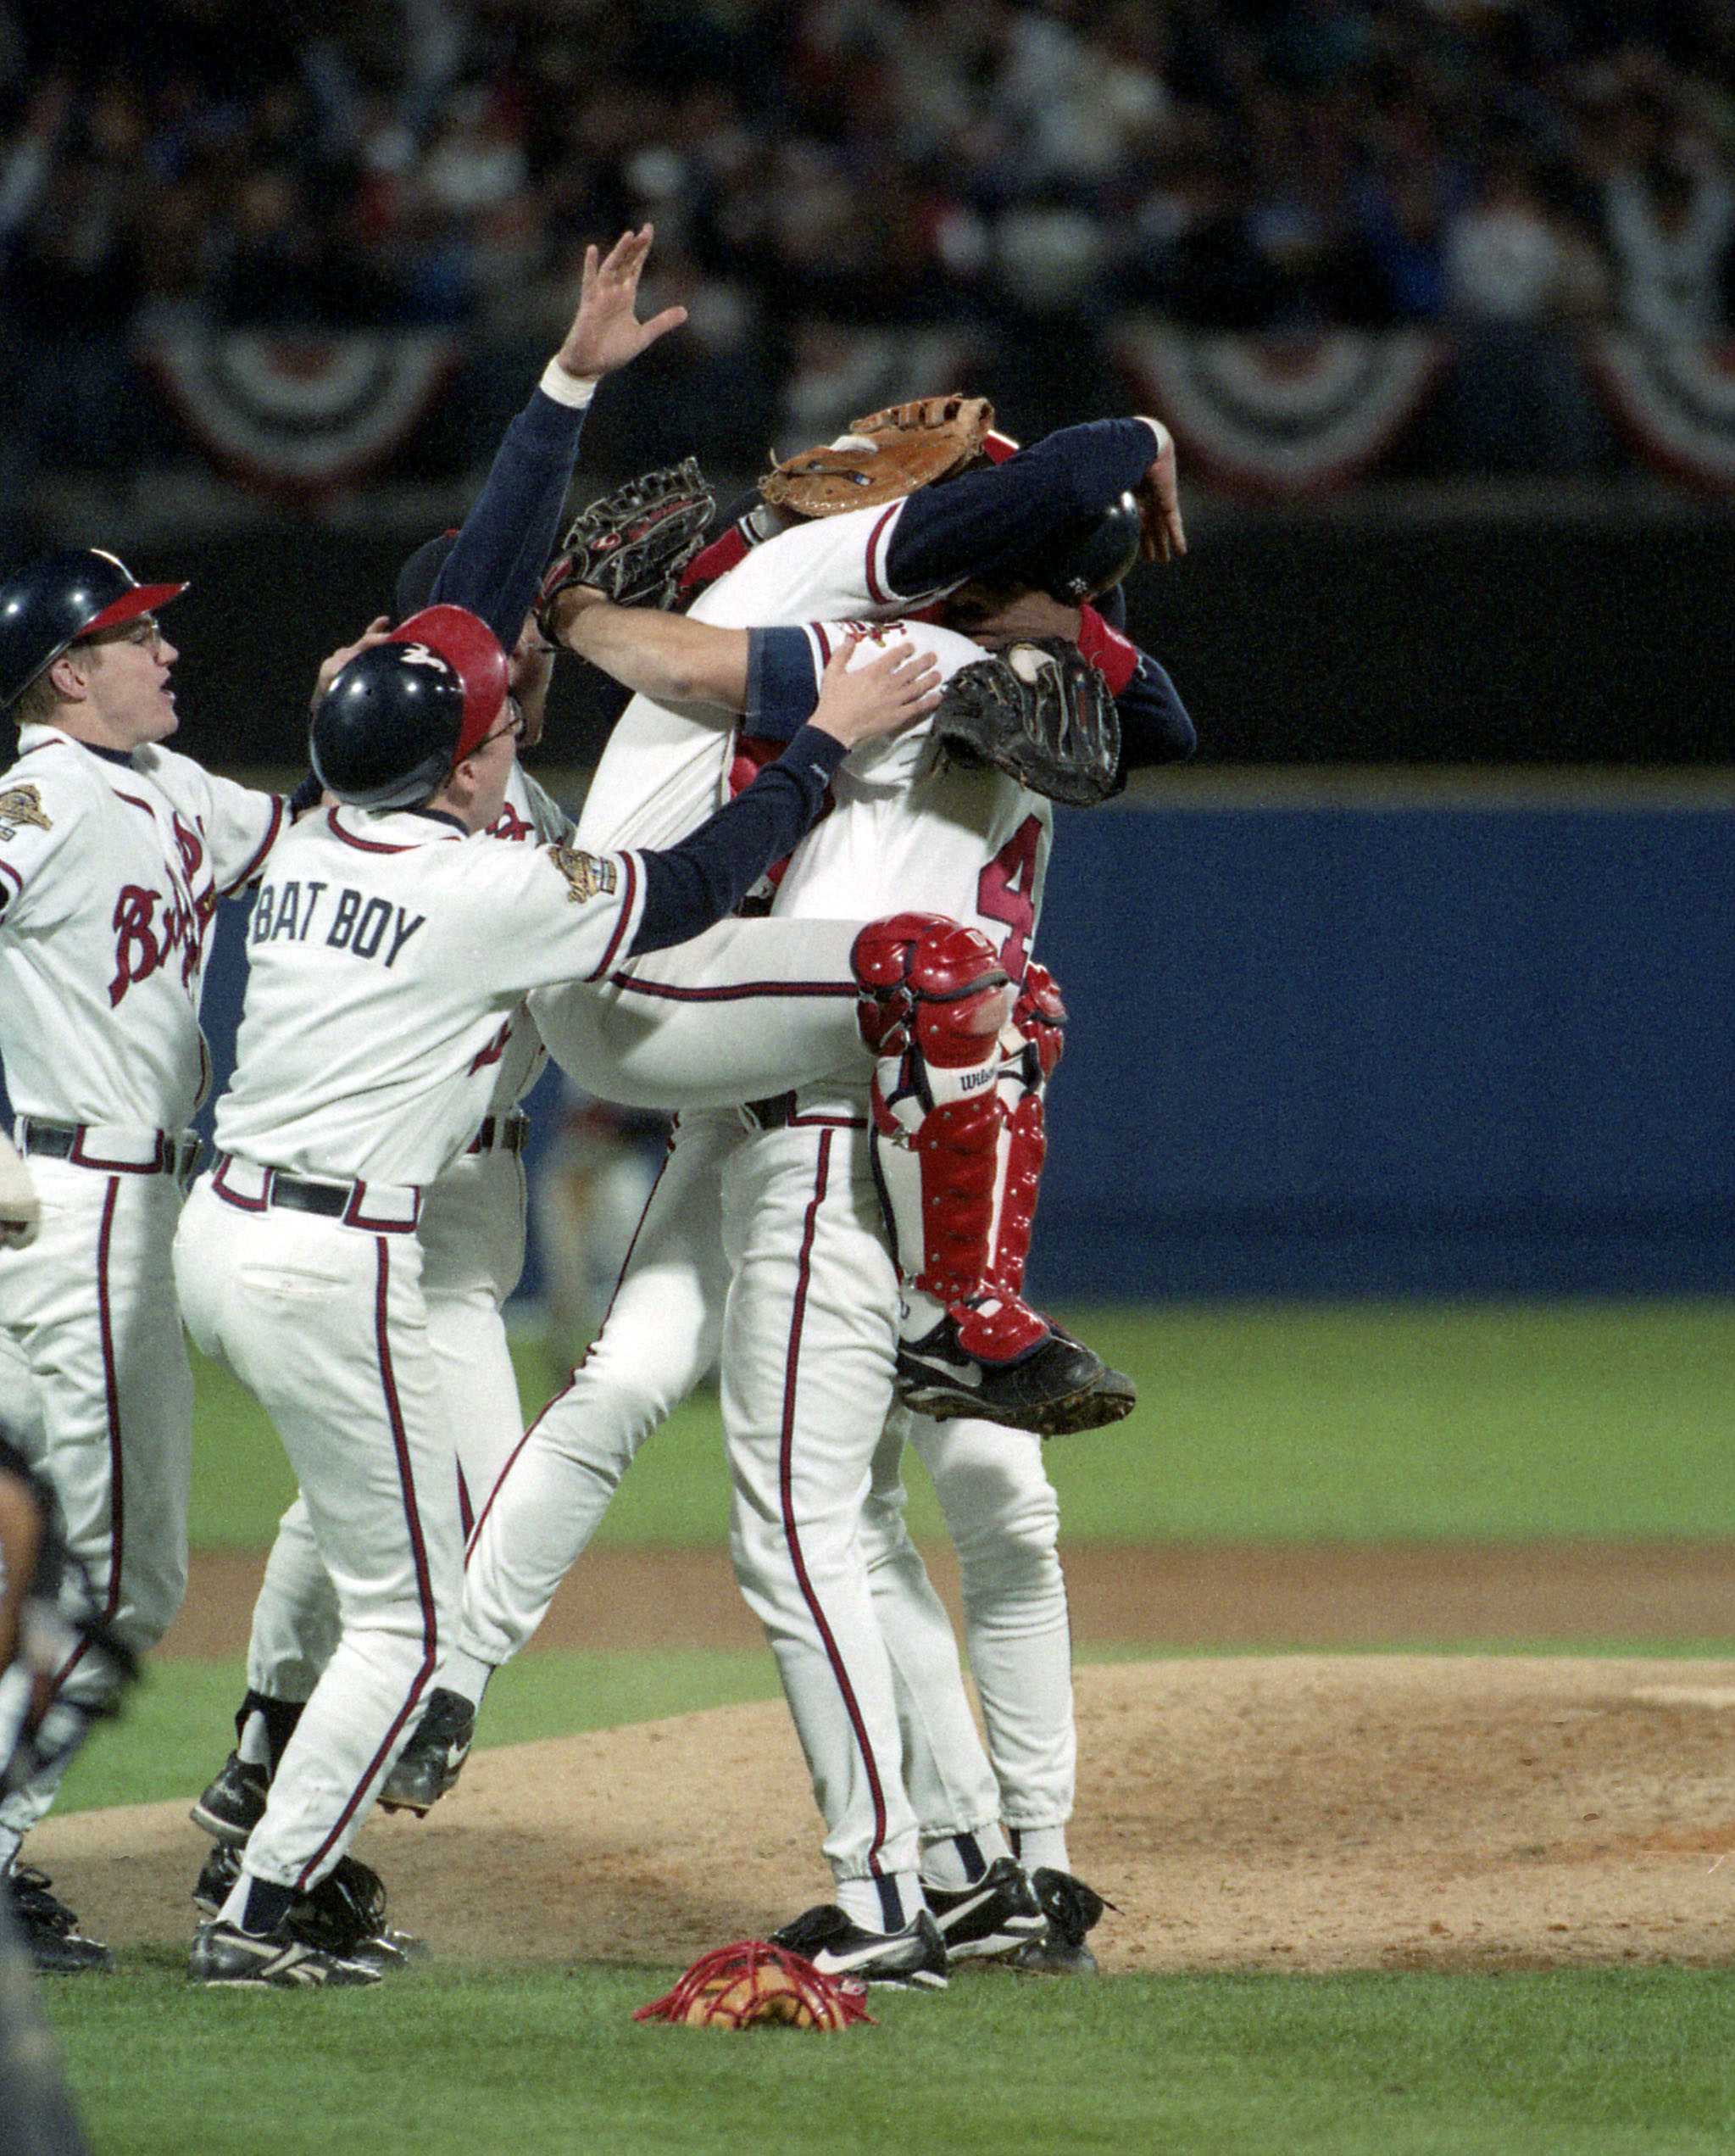 1995 Braves World Series Championship from the AJC